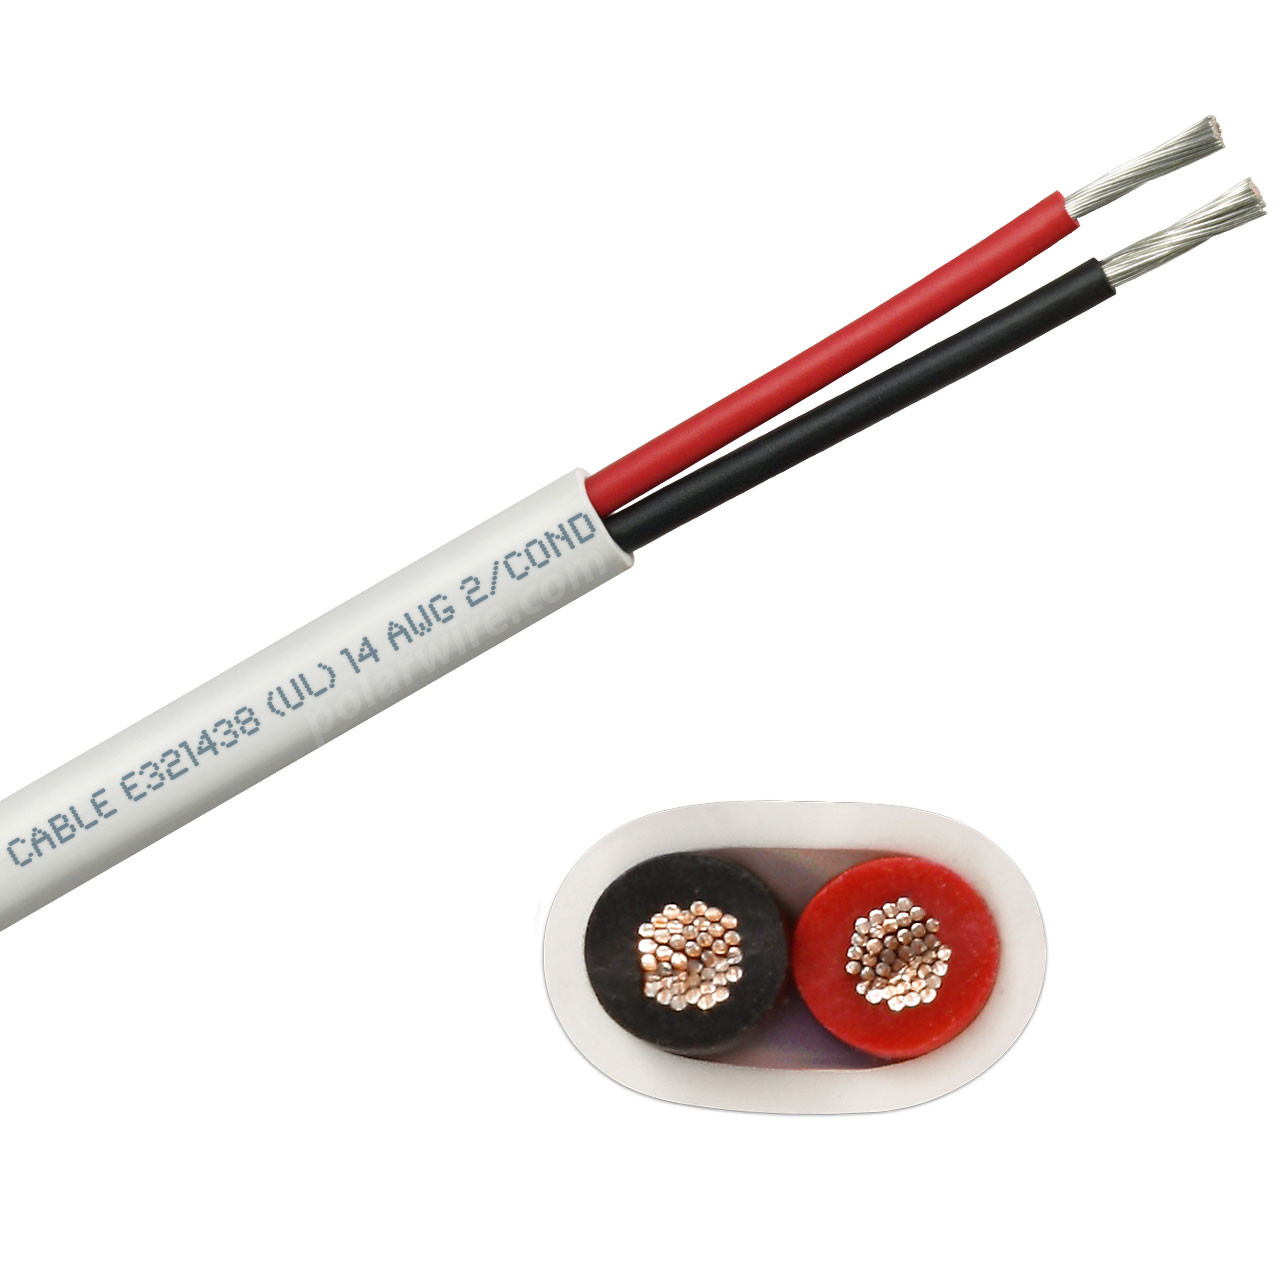 14 AWG flat red and black dc duplex marine grade tinned copper bc5w2 boat cable features ultra flexible Class K fine copper stranding for flexibility and conductivity, exceeds ABYC standards, UL Listed, CSA Certified